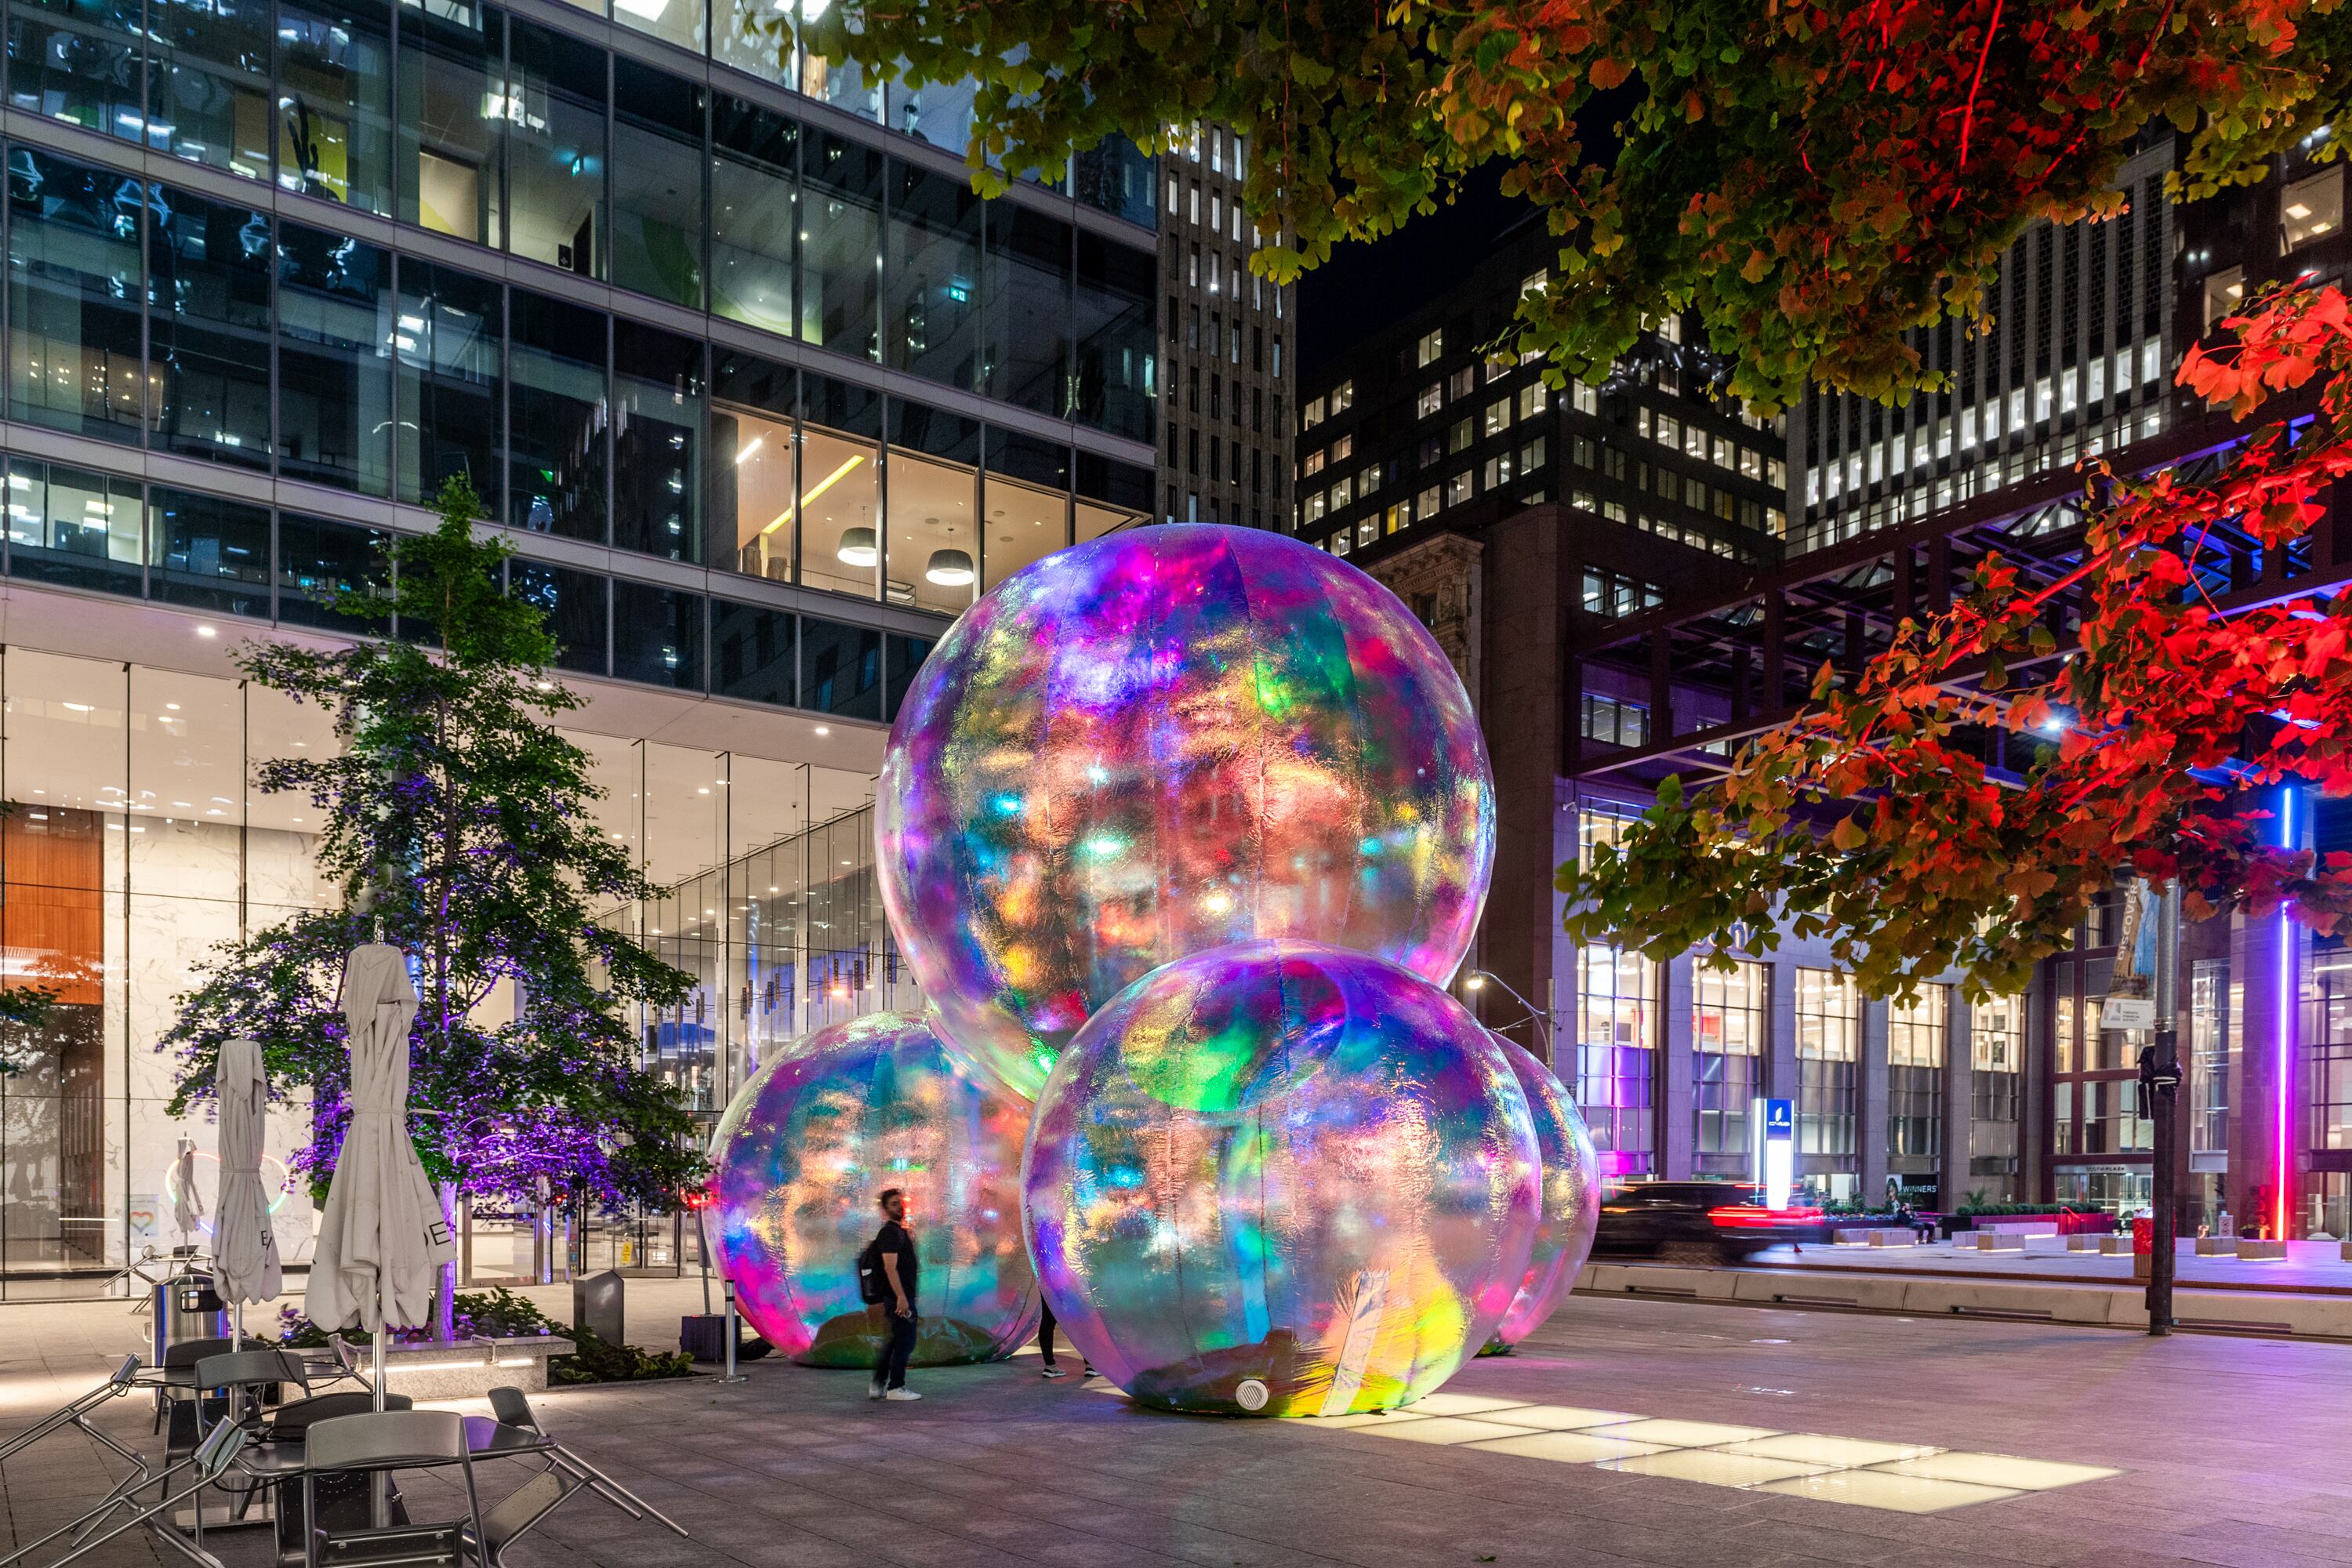 larger-than-life bubble artwork surrounded by office buildings at night